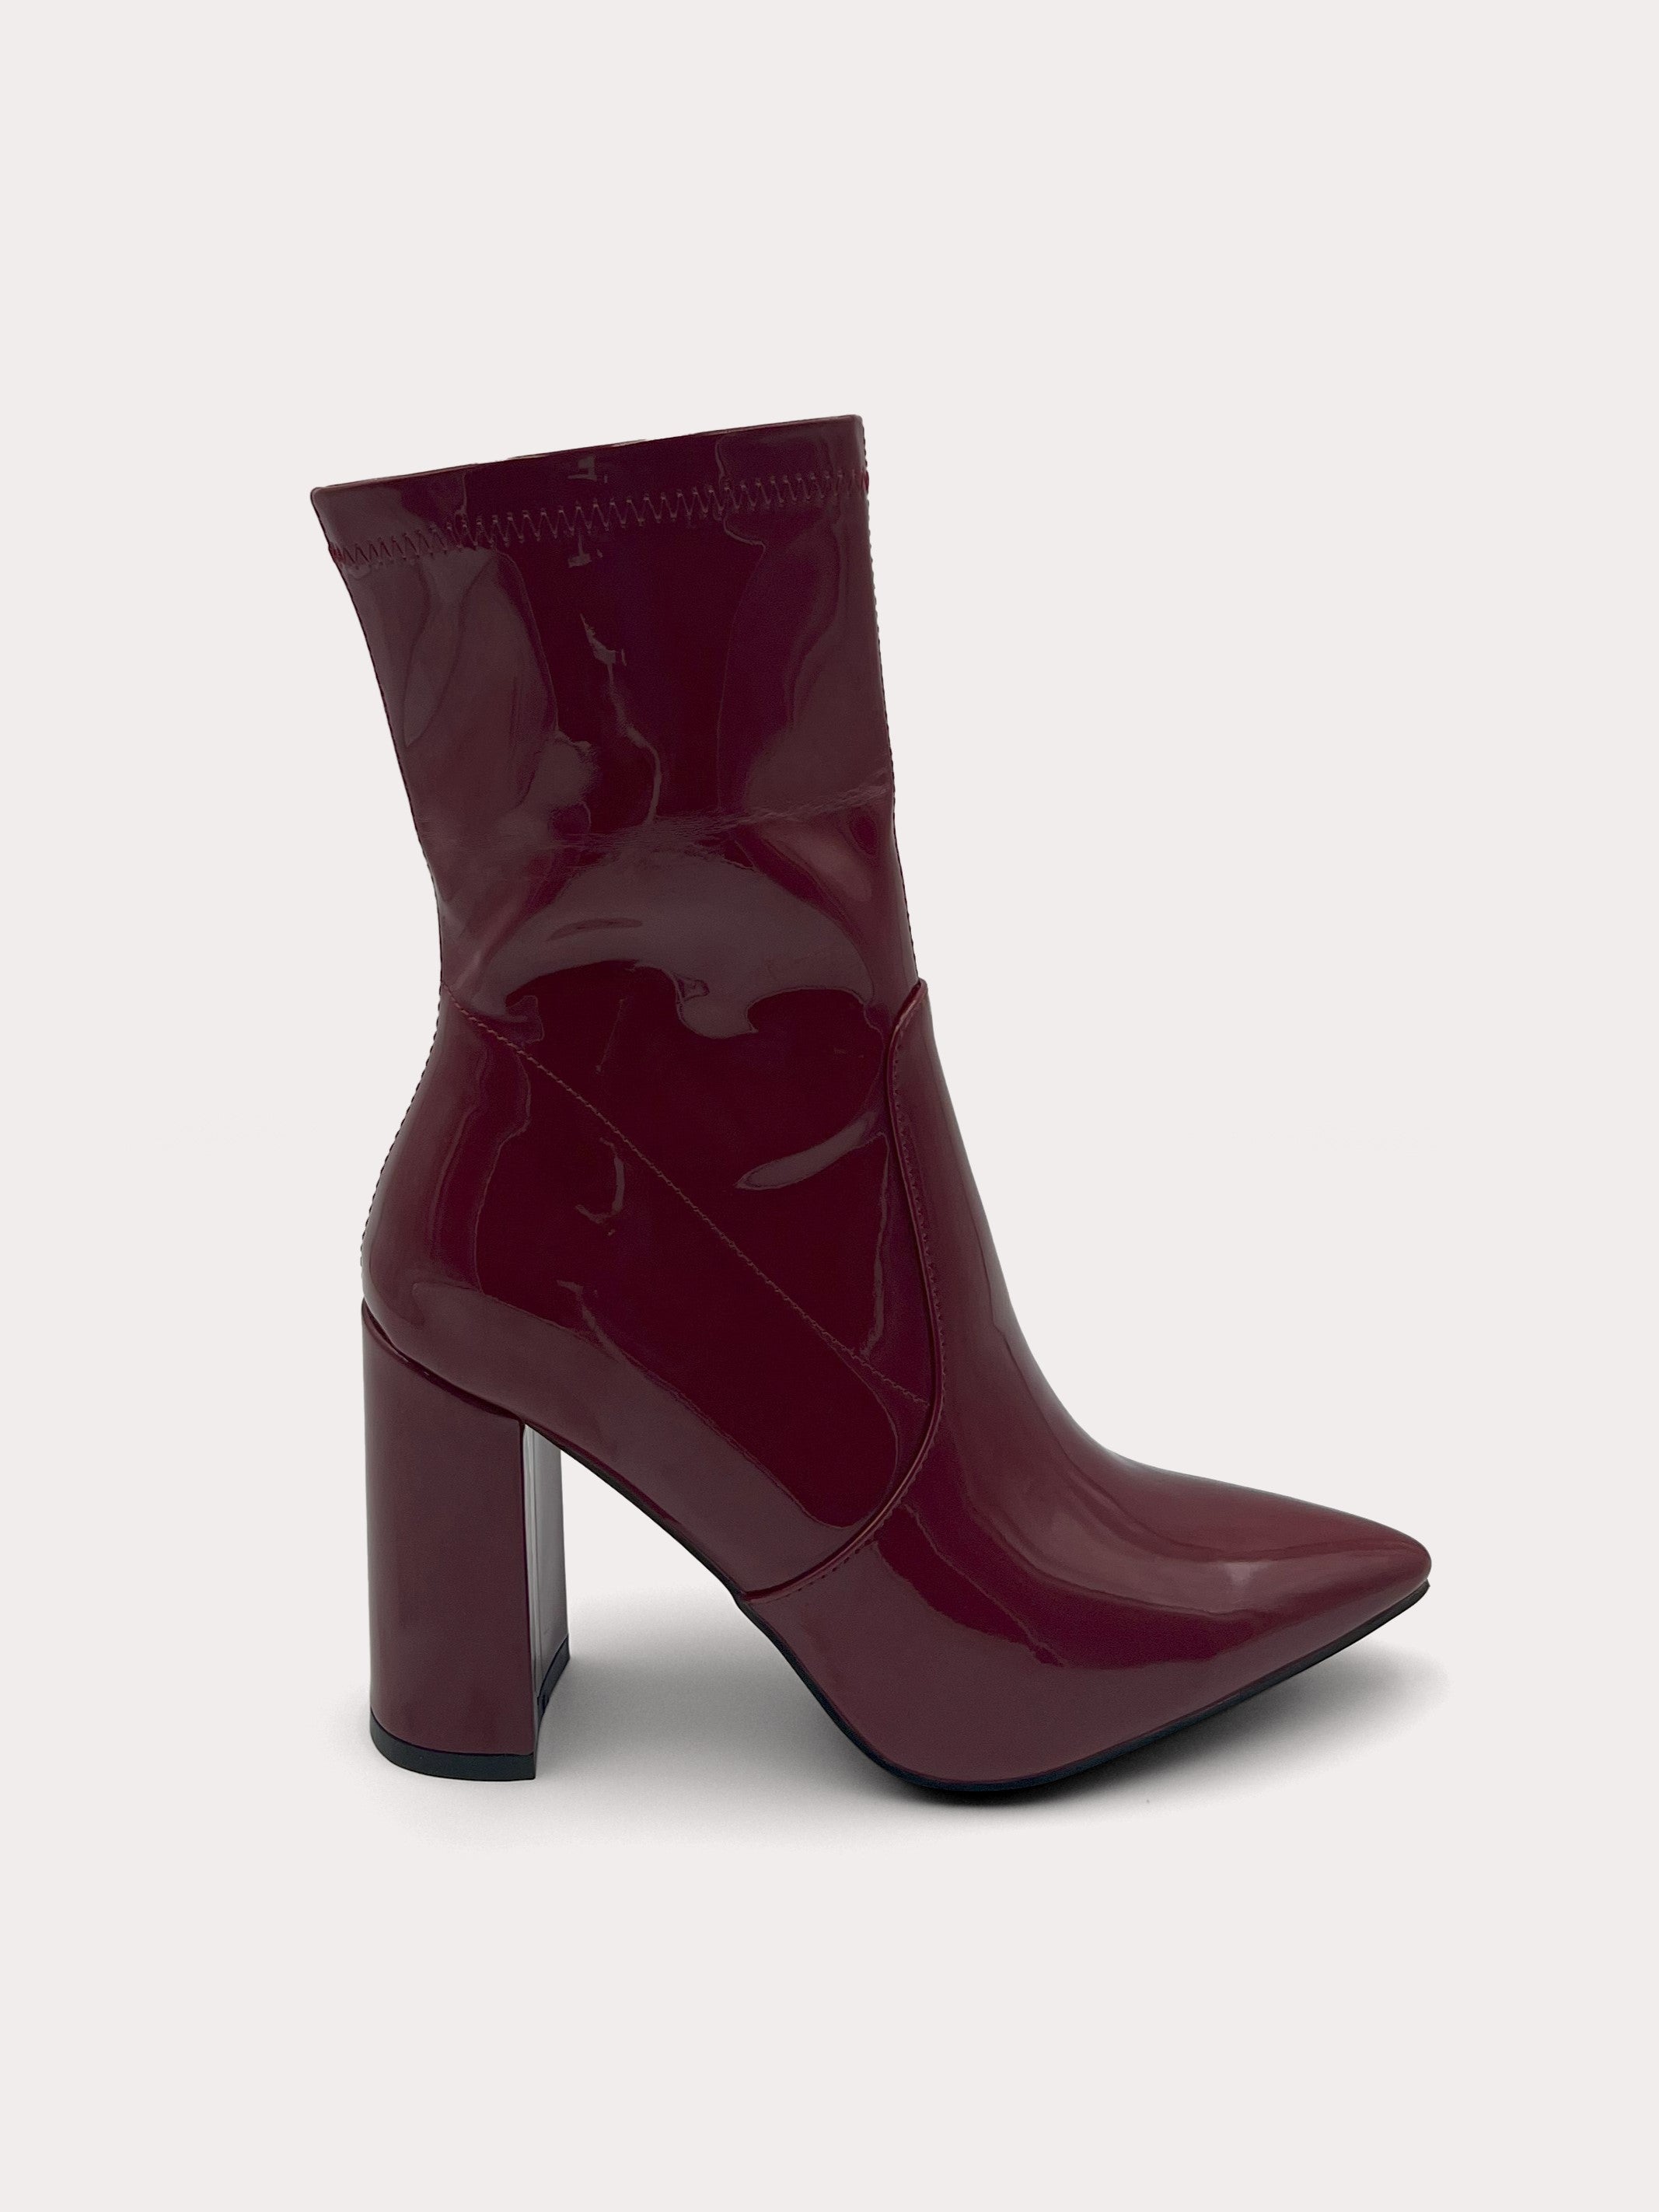 Taylor - Cherry boot with side zip